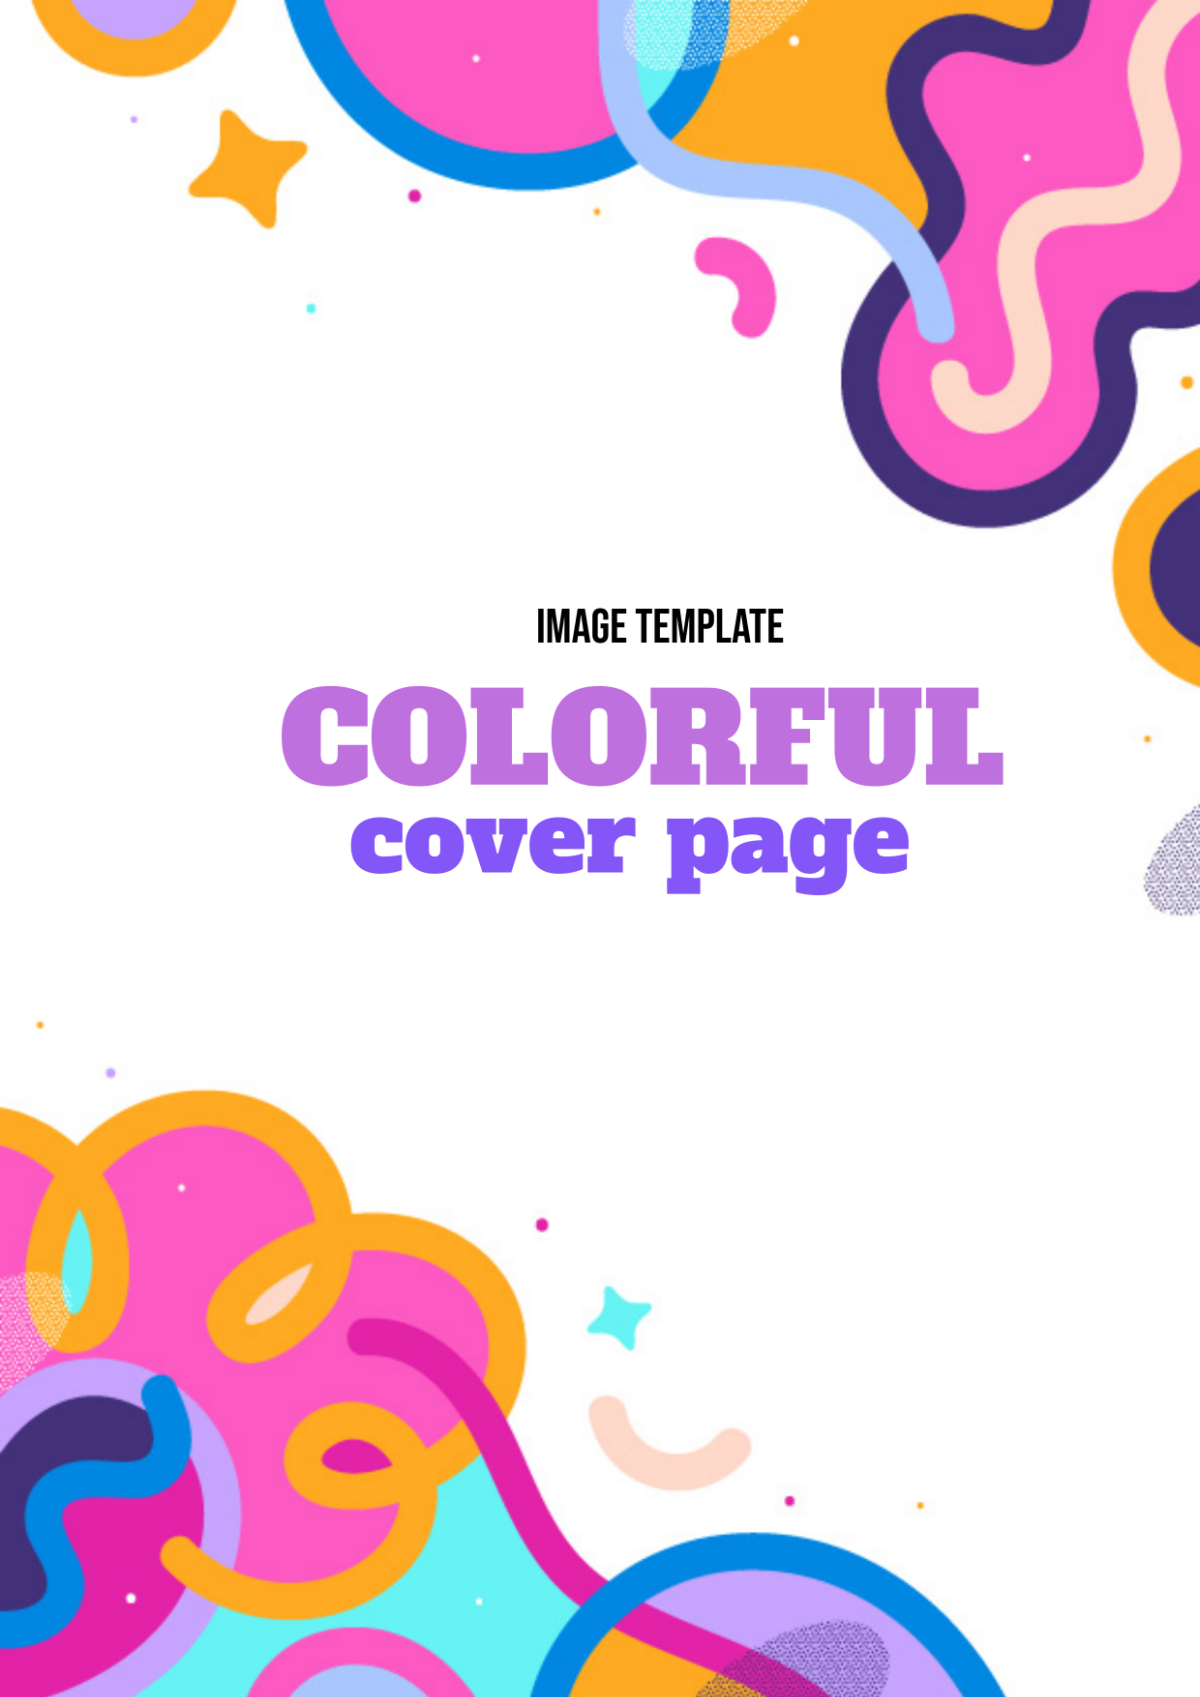 Colorful Cover Page Image Template - Edit Online & Download Example ...